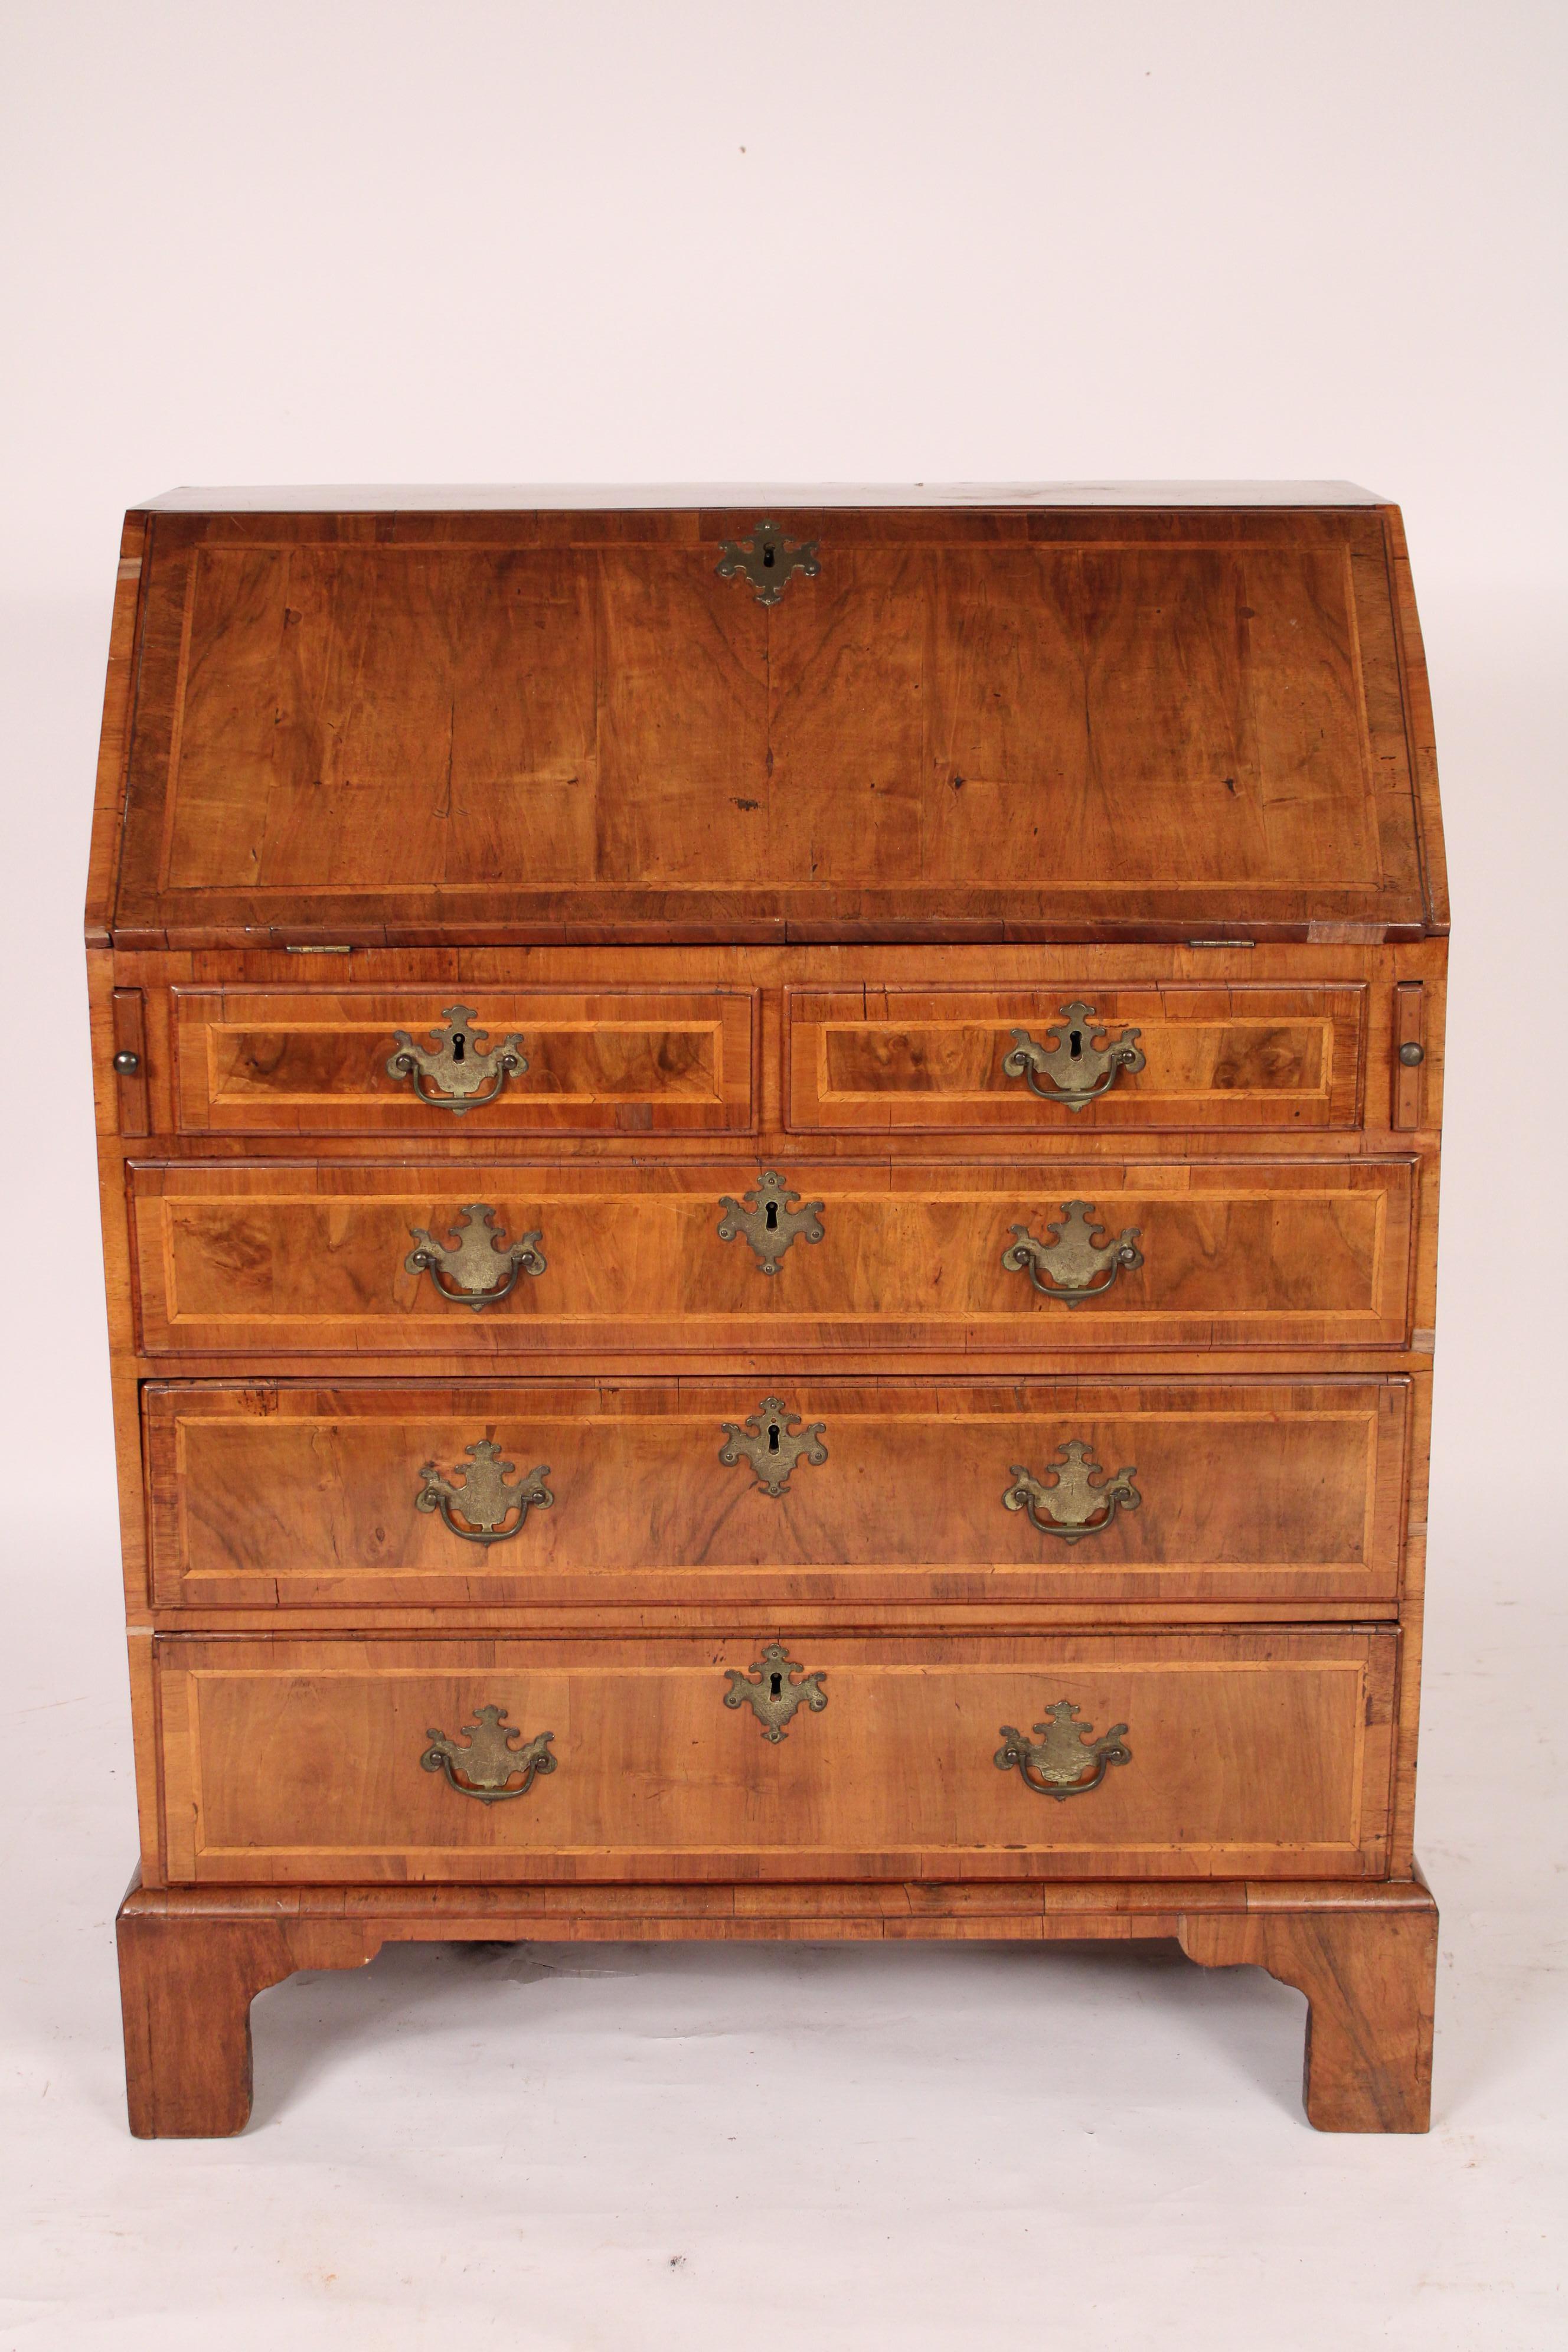 Antique George I style walnut slant top desk, 19th century. With a walnut slant top with herringbone inlay, interior with prospect door flanked on either side by two drawers and cubby holes, top two drawers and 3 graduated lower drawers all with